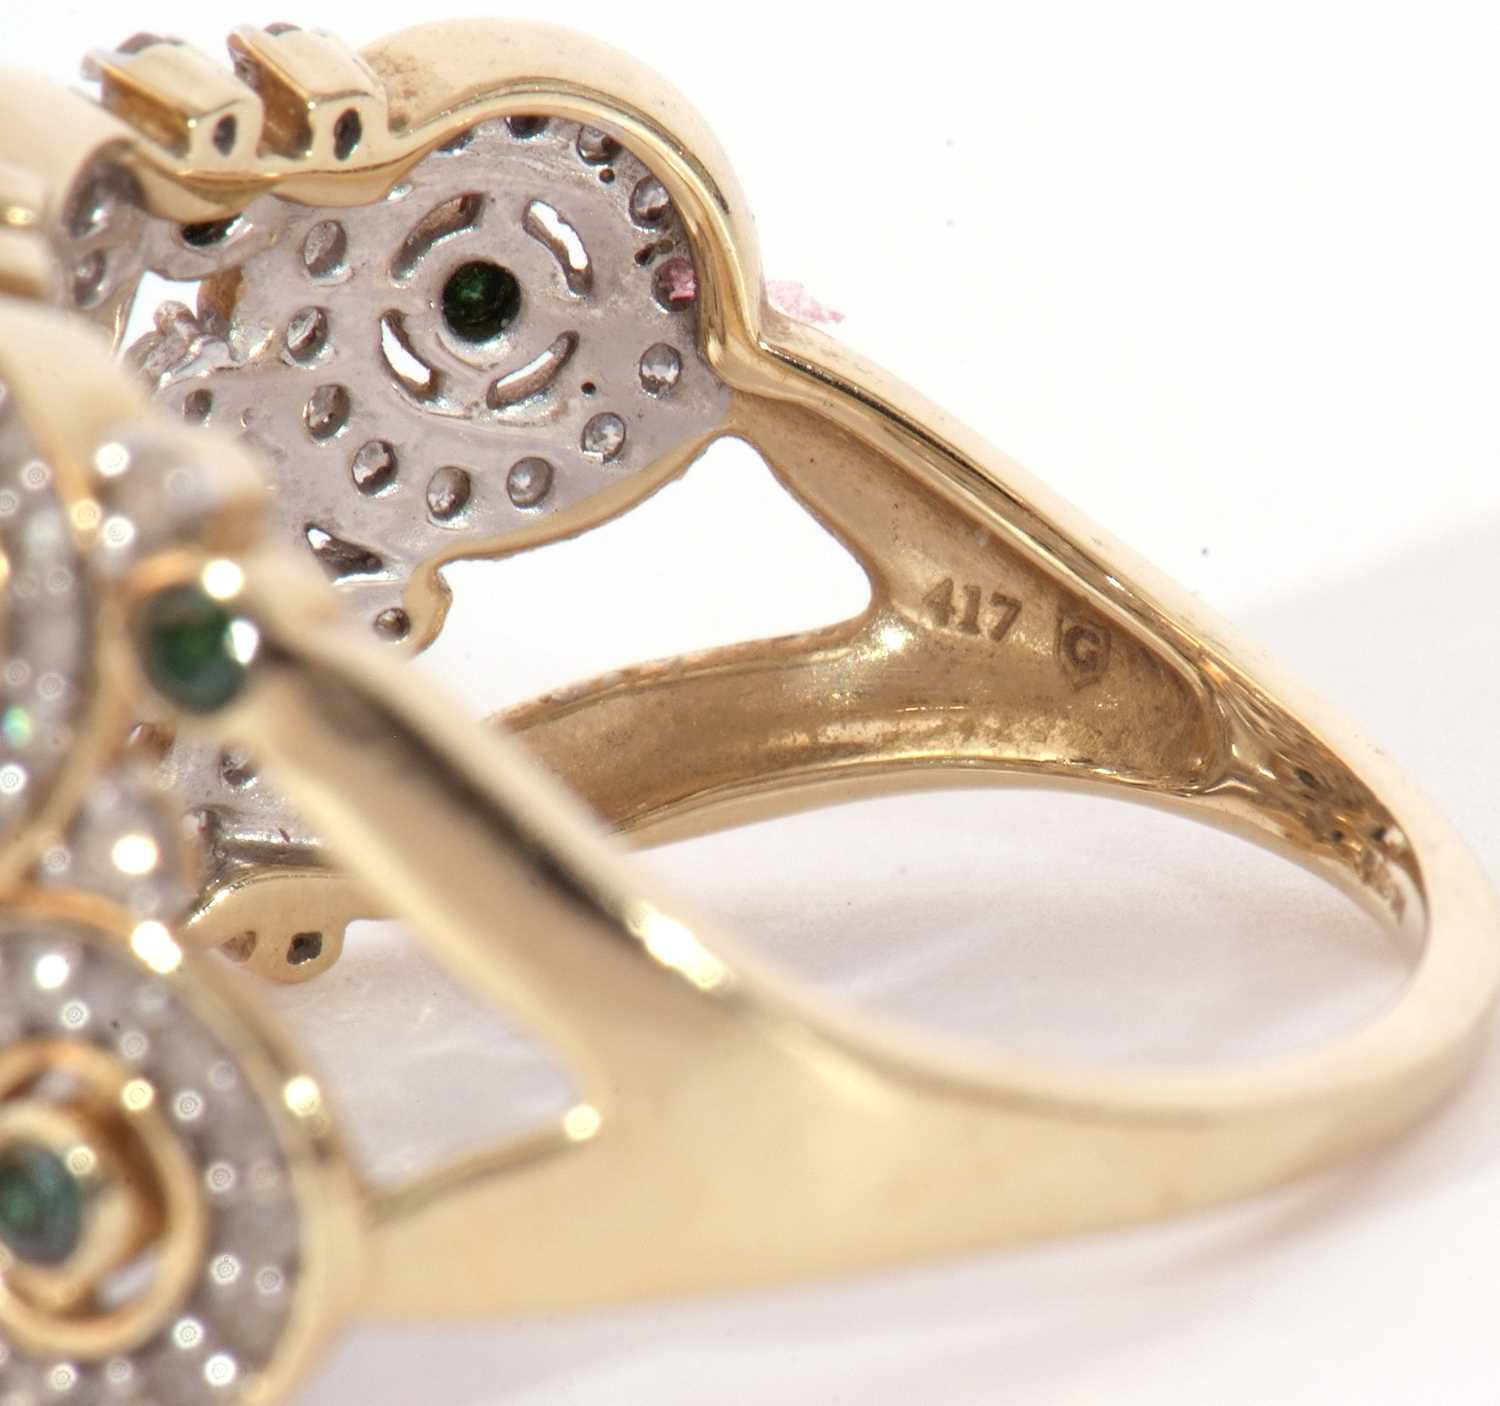 Modern 9ct gold, diamond and green stone set ring, a design featuring six small diamond set discs - Image 7 of 10